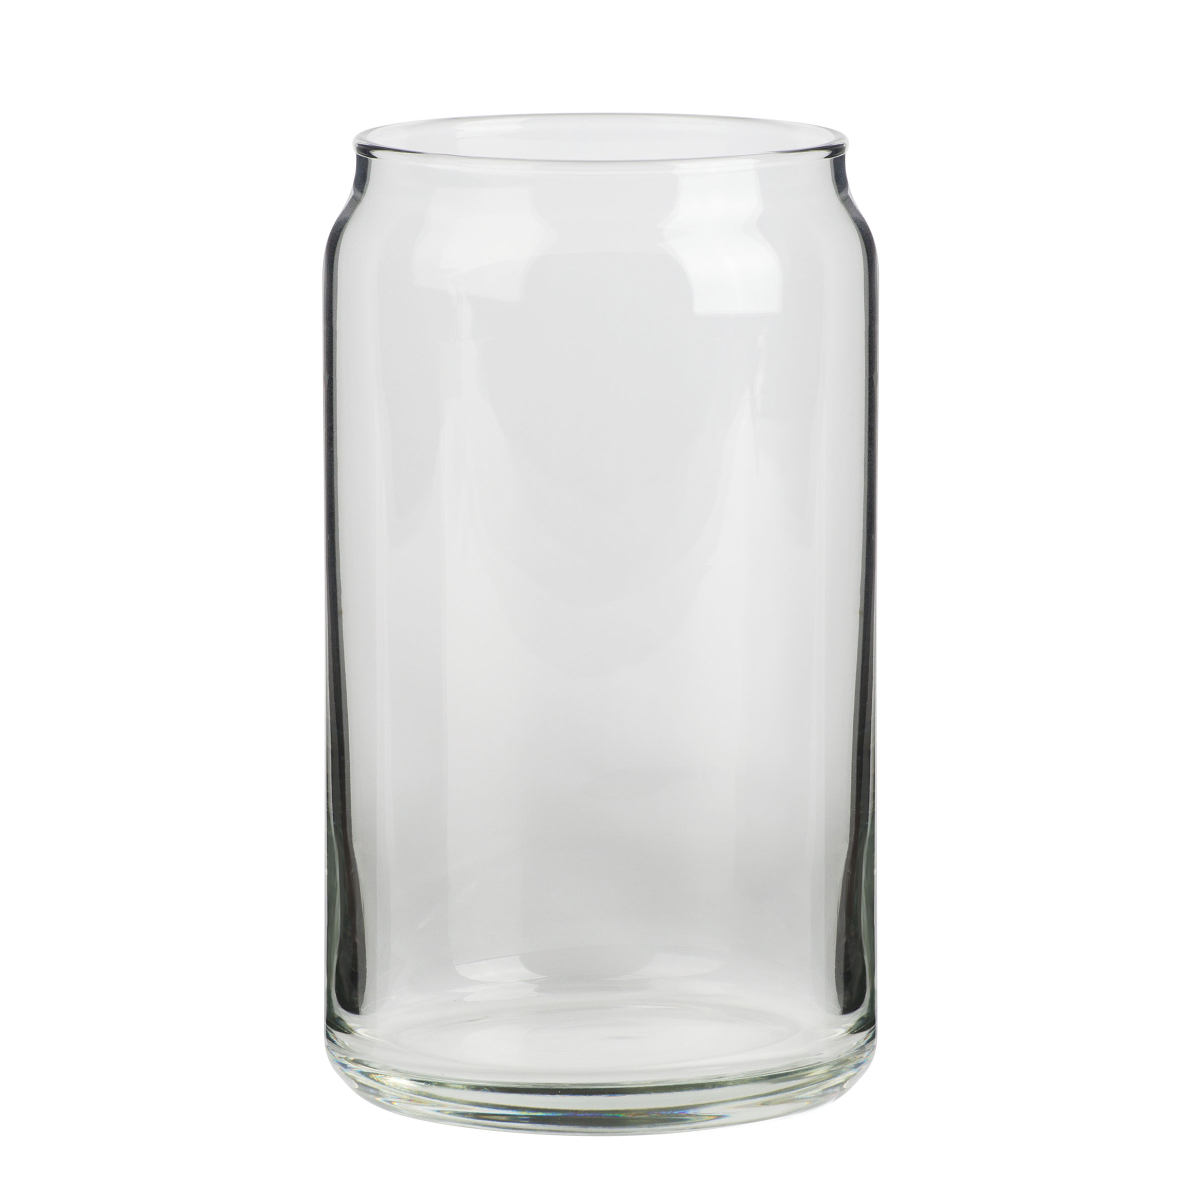 Glass Beer Can Glass (16 oz) - Currently Unavailable until 2022